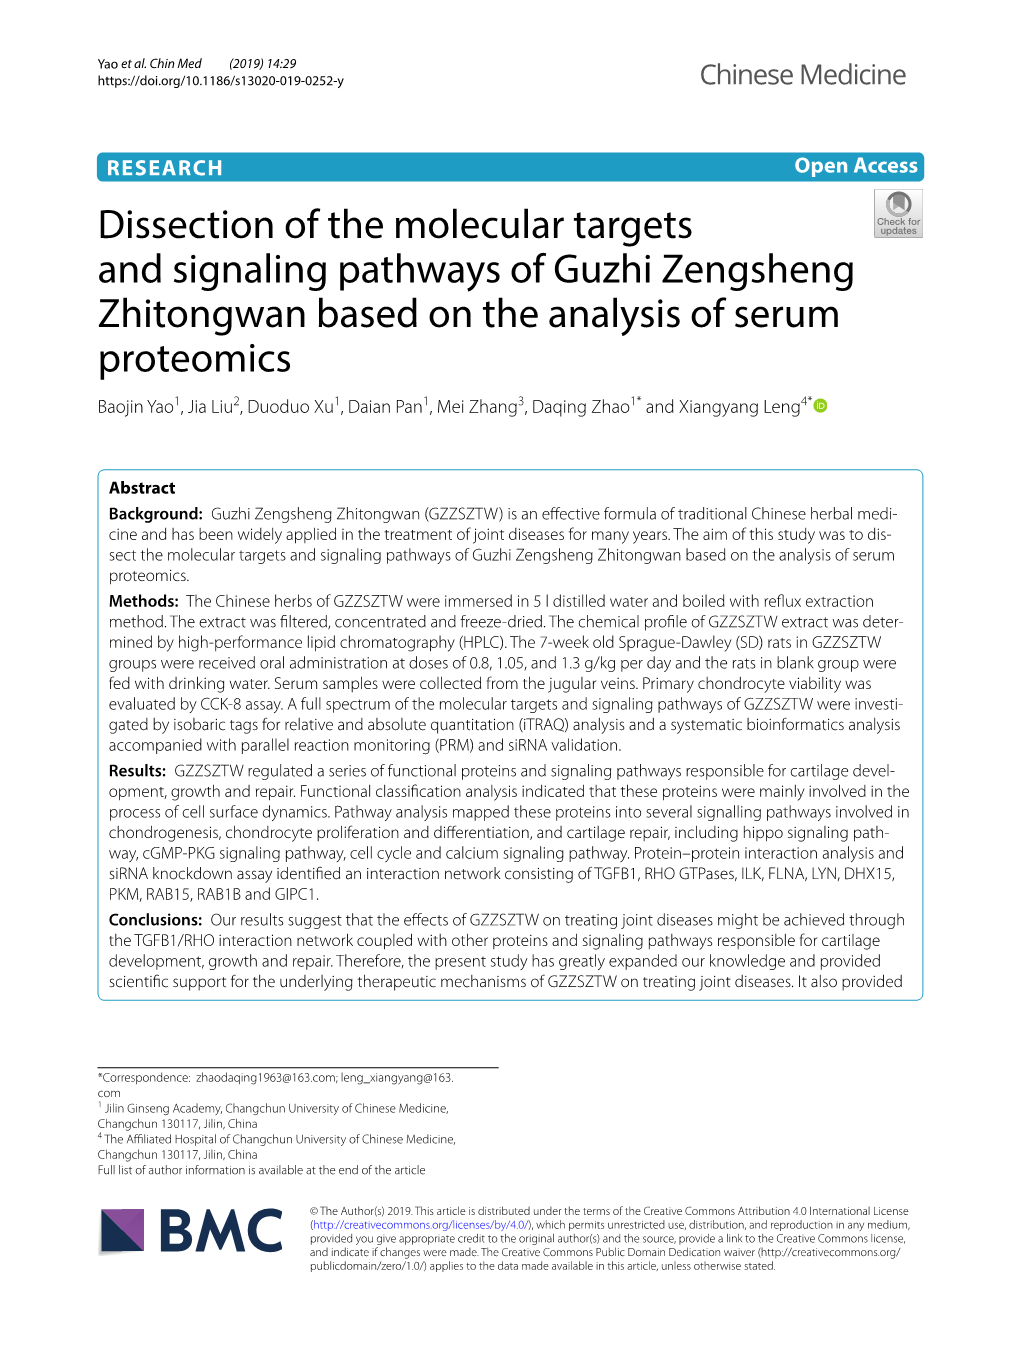 Dissection of the Molecular Targets and Signaling Pathways of Guzhi Zengsheng Zhitongwan Based on the Analysis of Serum Proteomi